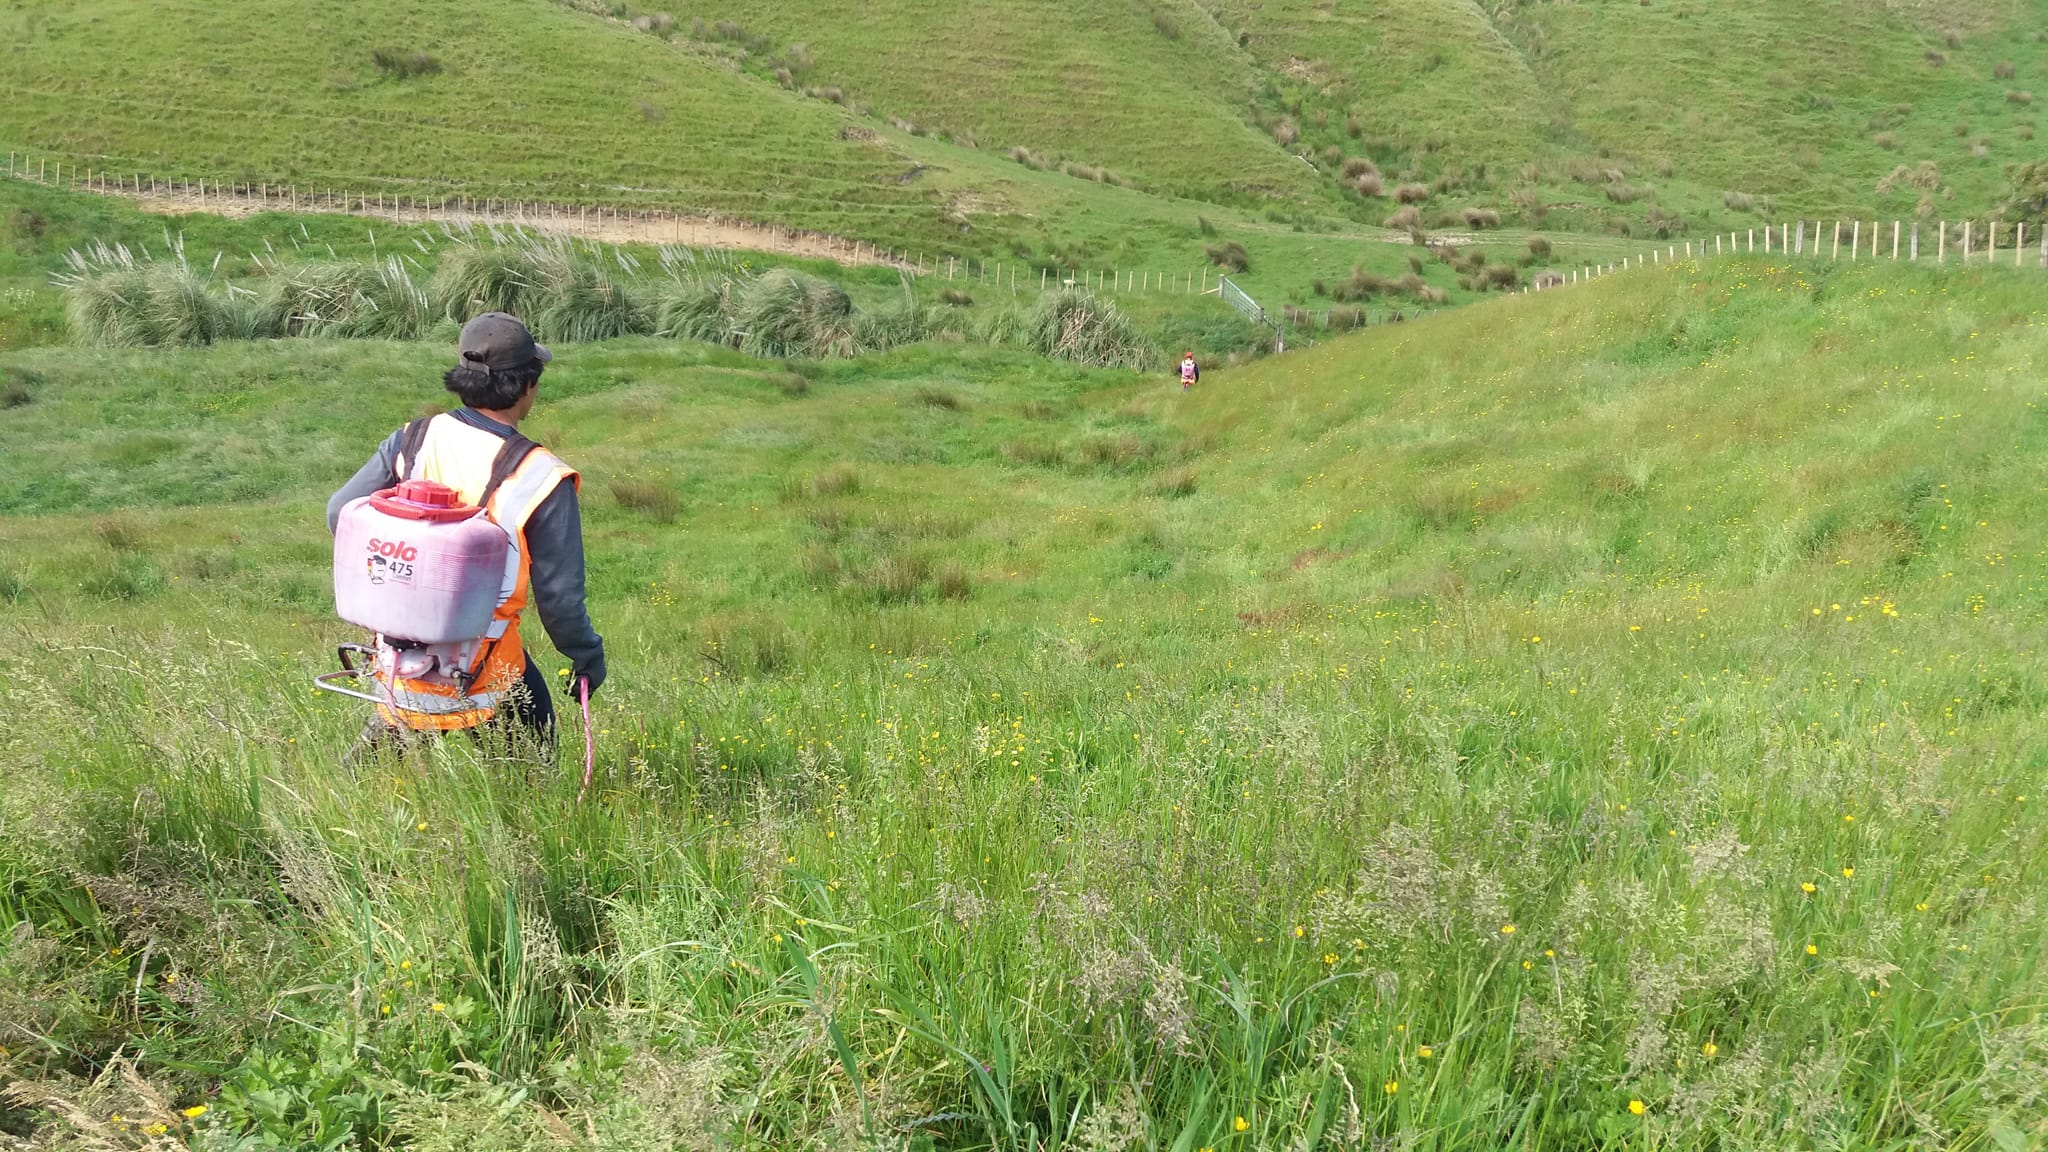 Native Solutions team performing erosion control and native planting with precision chemical spraying techniques on a hillside in Canterbury, South Island